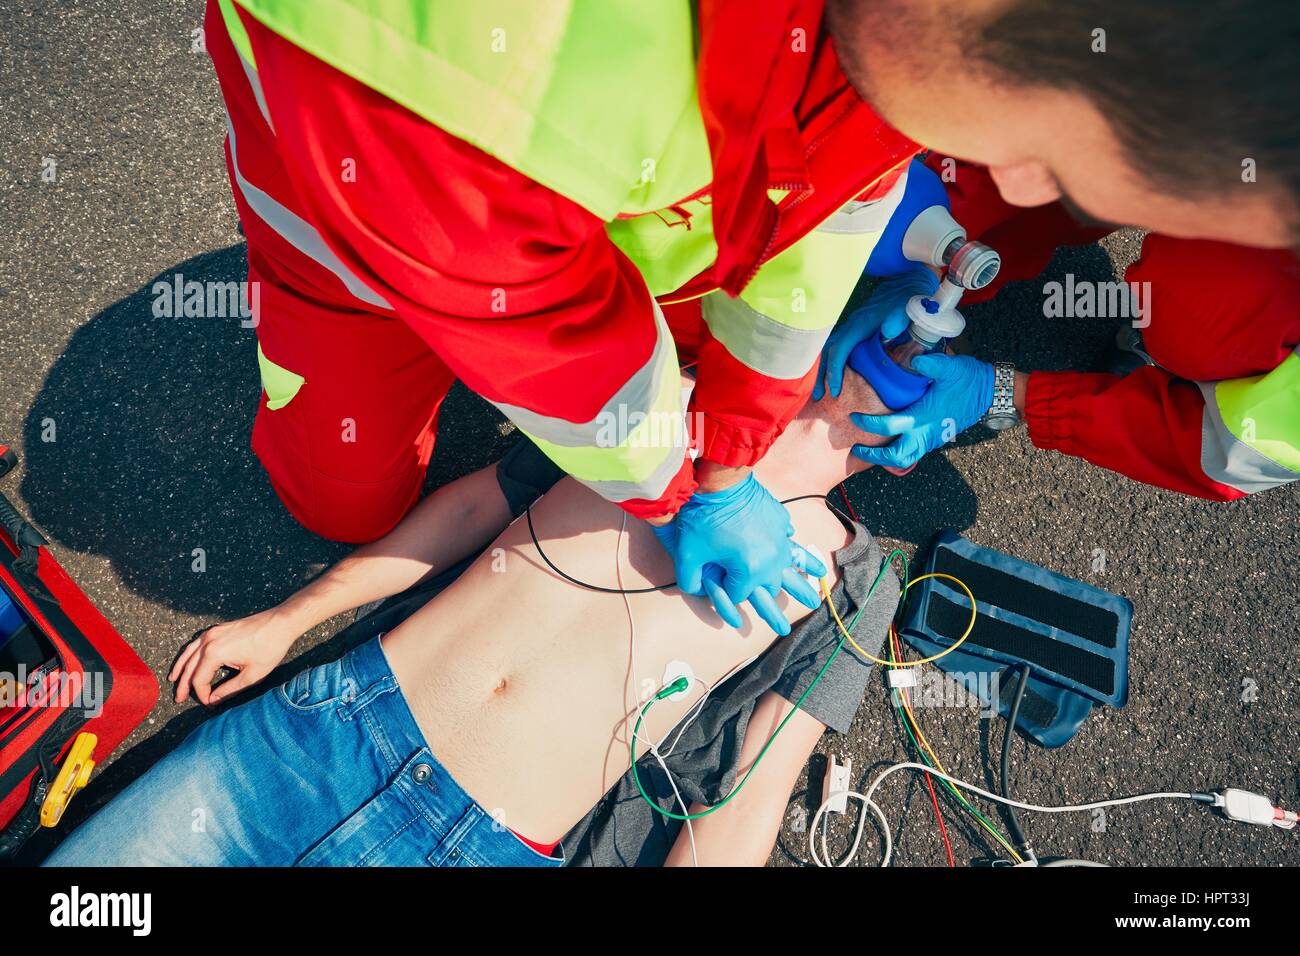 Cardiopulmonary resuscitation. Rescue team (doctor and a paramedic) resuscitating the man on the street. Stock Photo